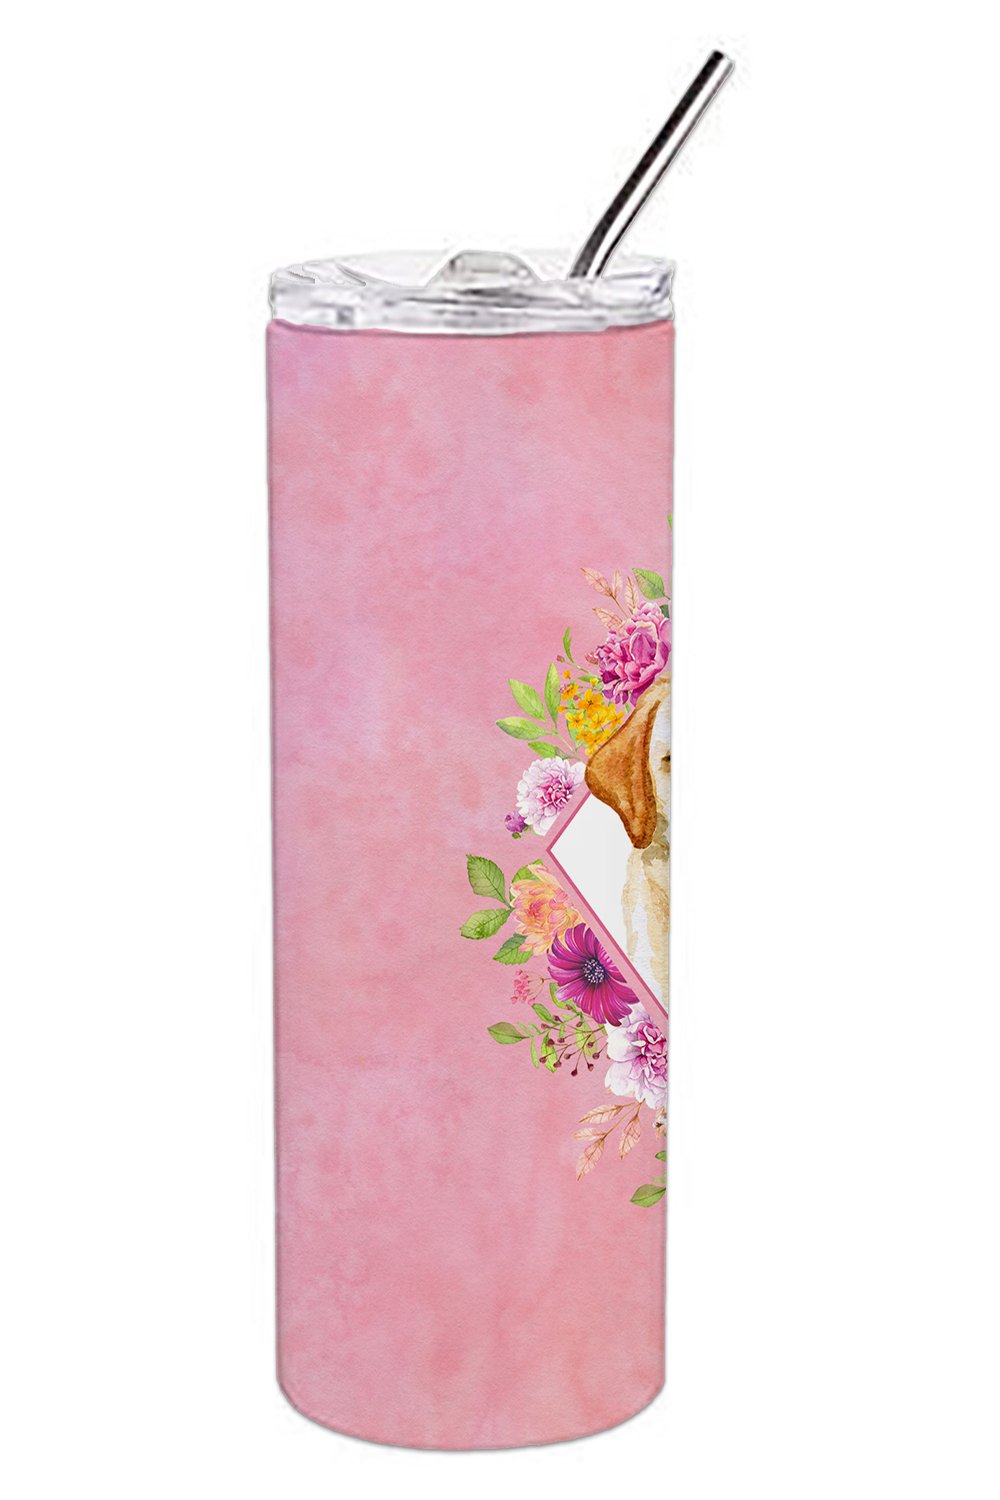 Golden Retriever Pink Flowers Double Walled Stainless Steel 20 oz Skinny Tumbler CK4149TBL20 by Caroline's Treasures